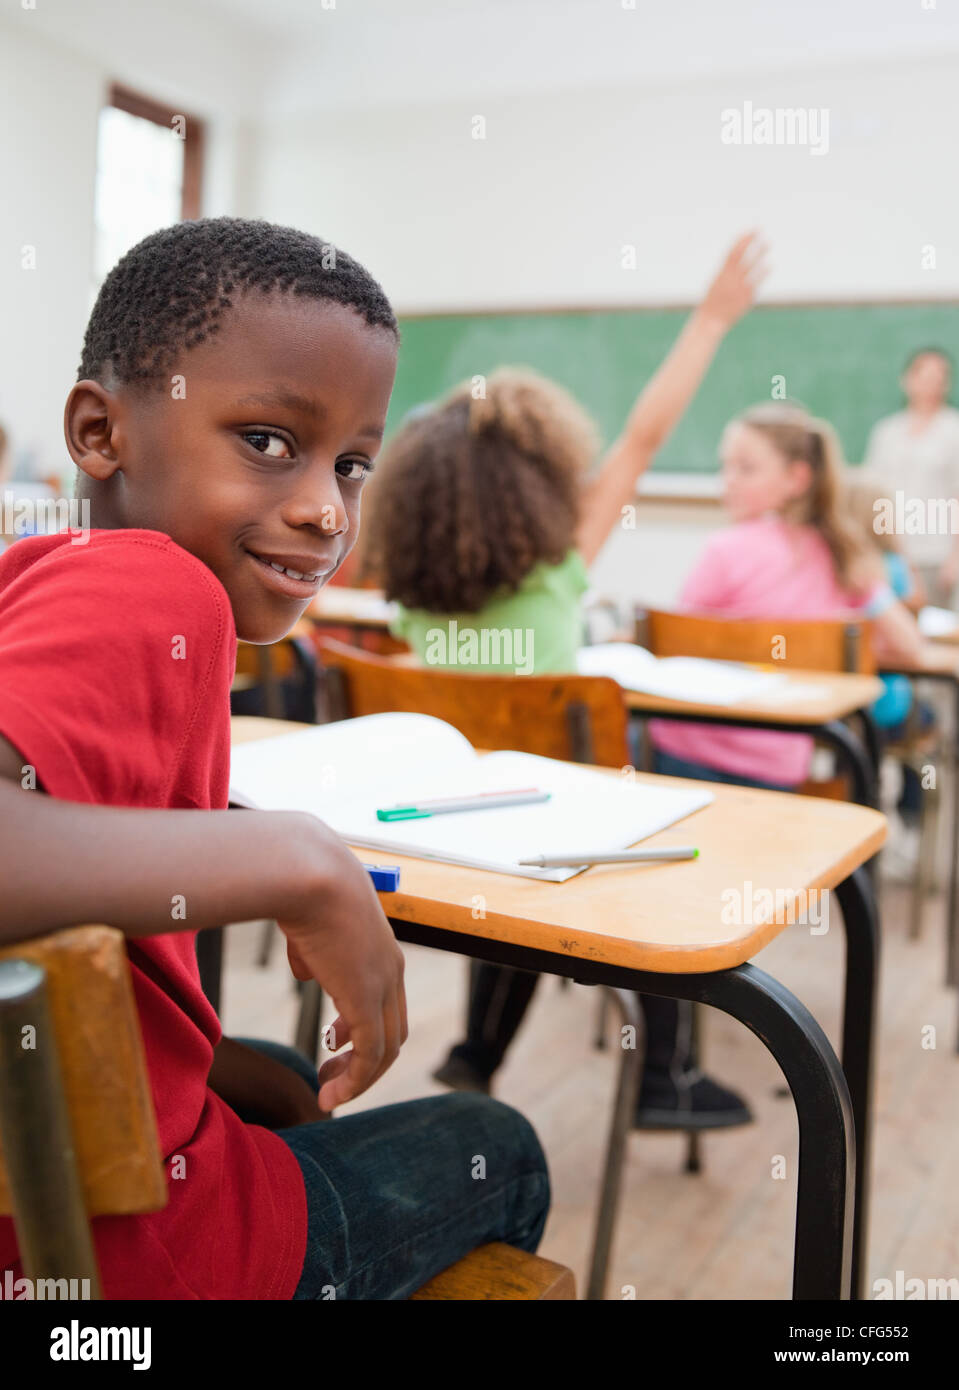 Smiling student turned around in class Stock Photo